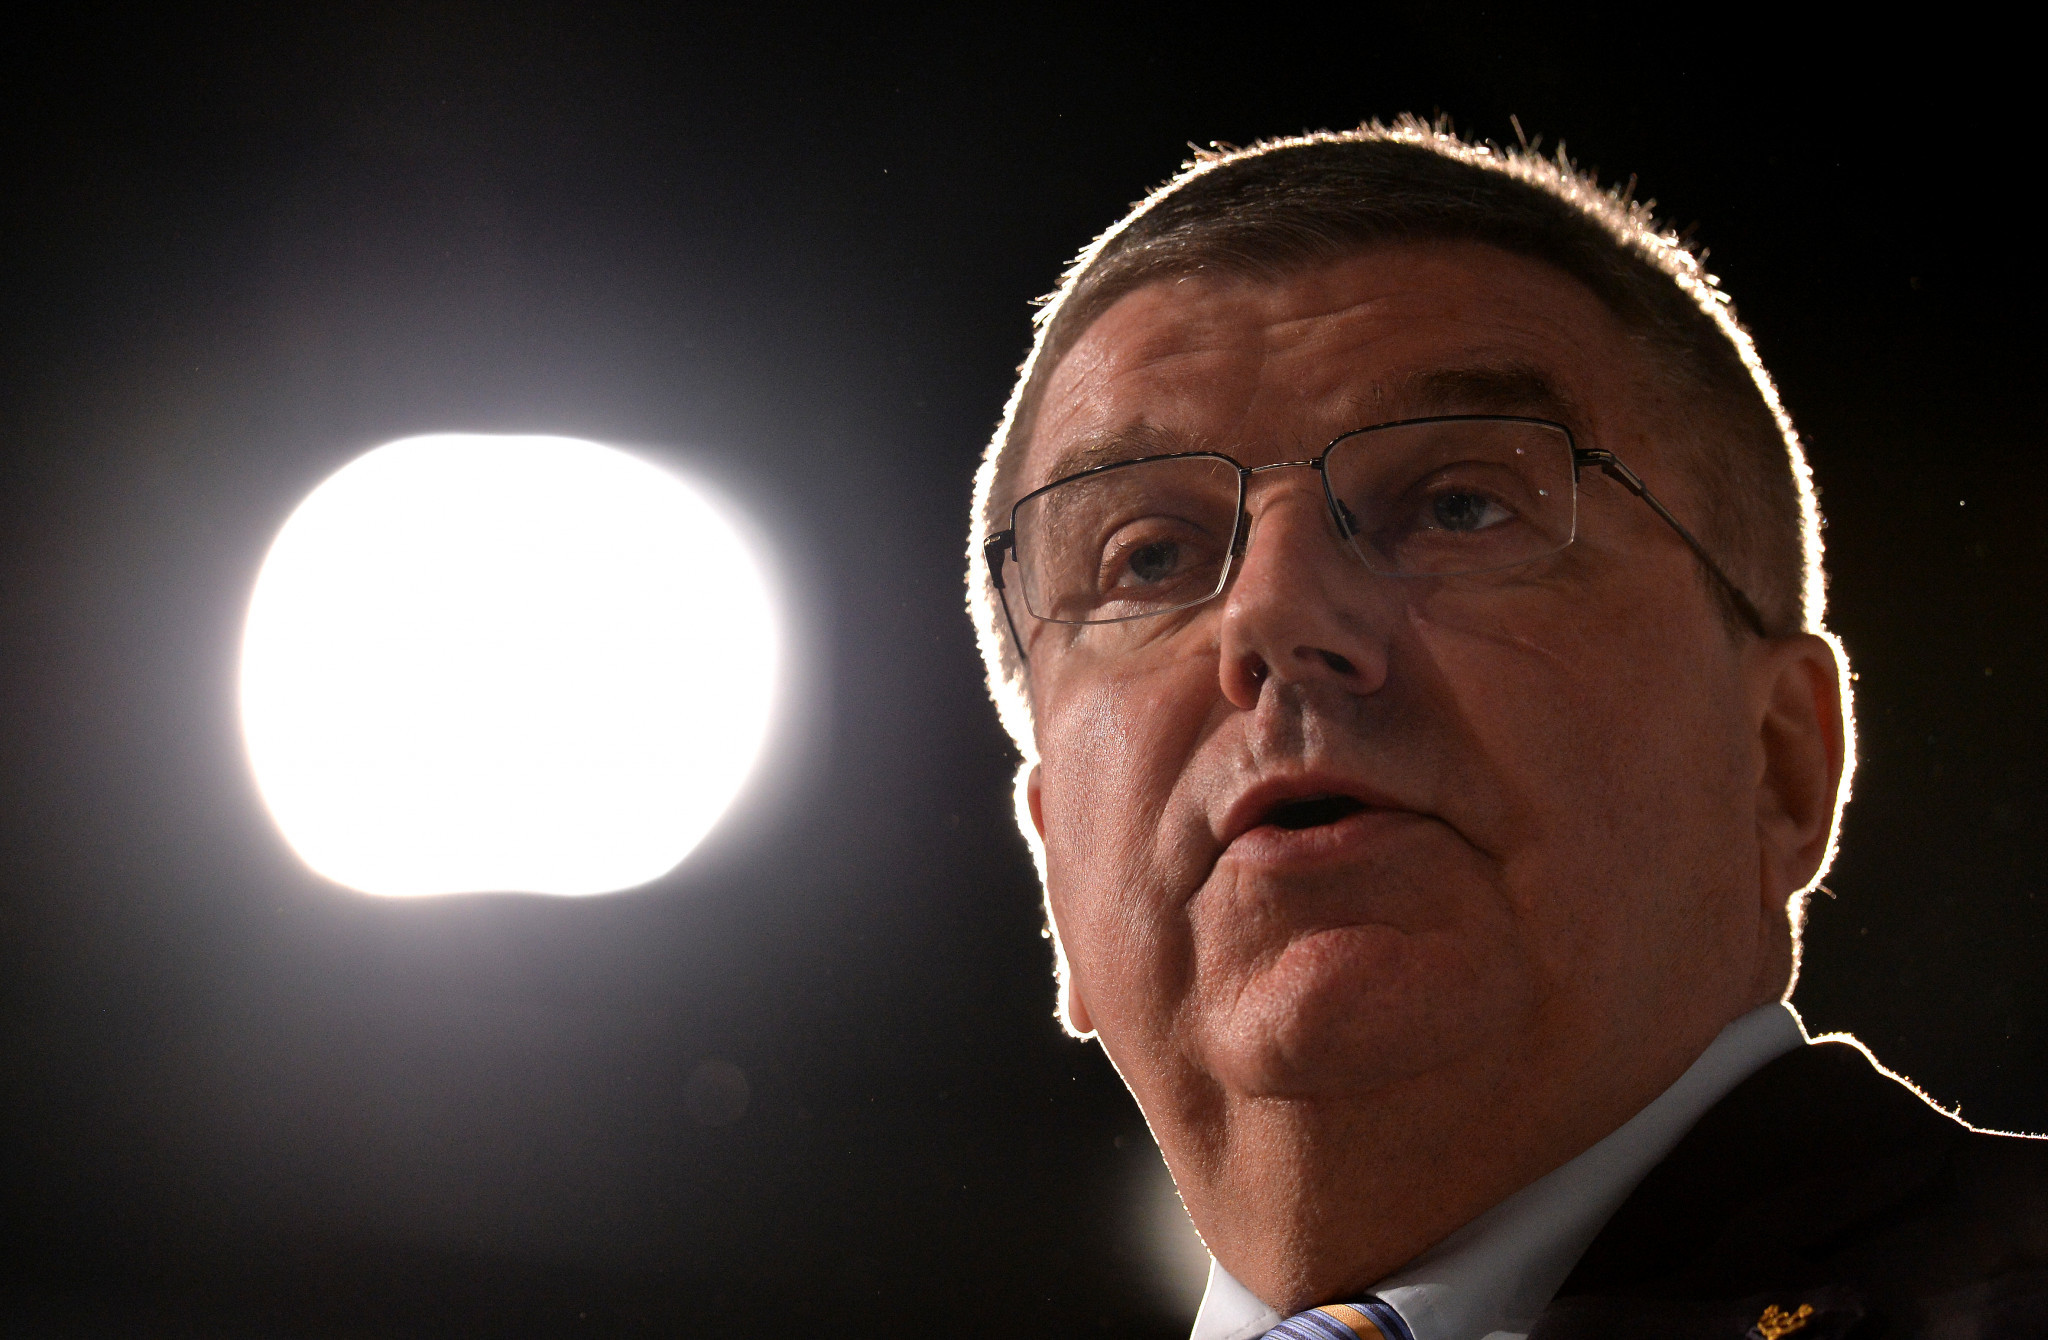 IOC President Thomas Bach said RUSADA's non-compliance and Russia competing at Pyeongchang 2018 were separate issues ©Getty Images